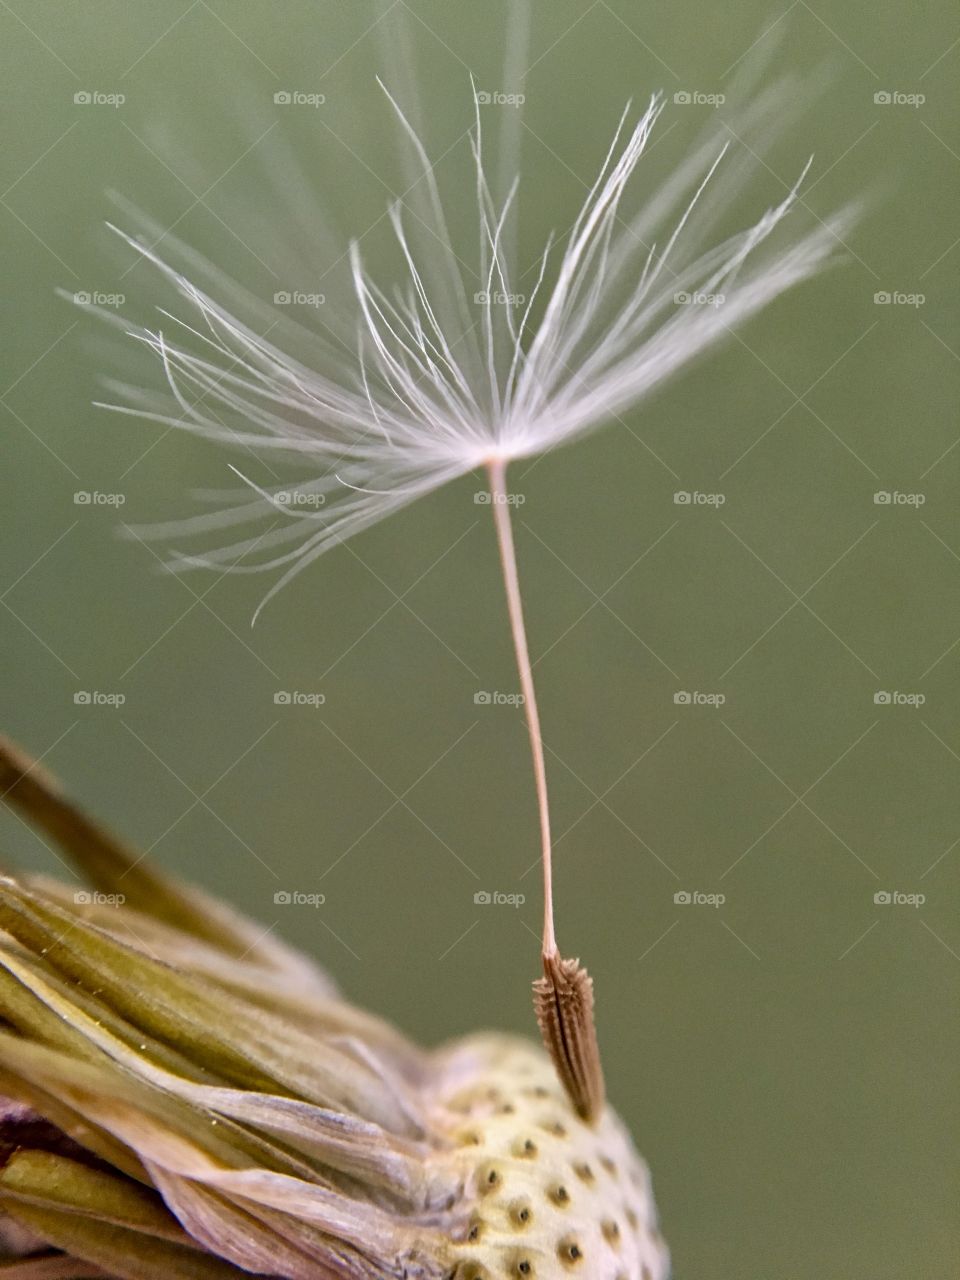 ... last tiny dandelion seed ... hanging by a thread 